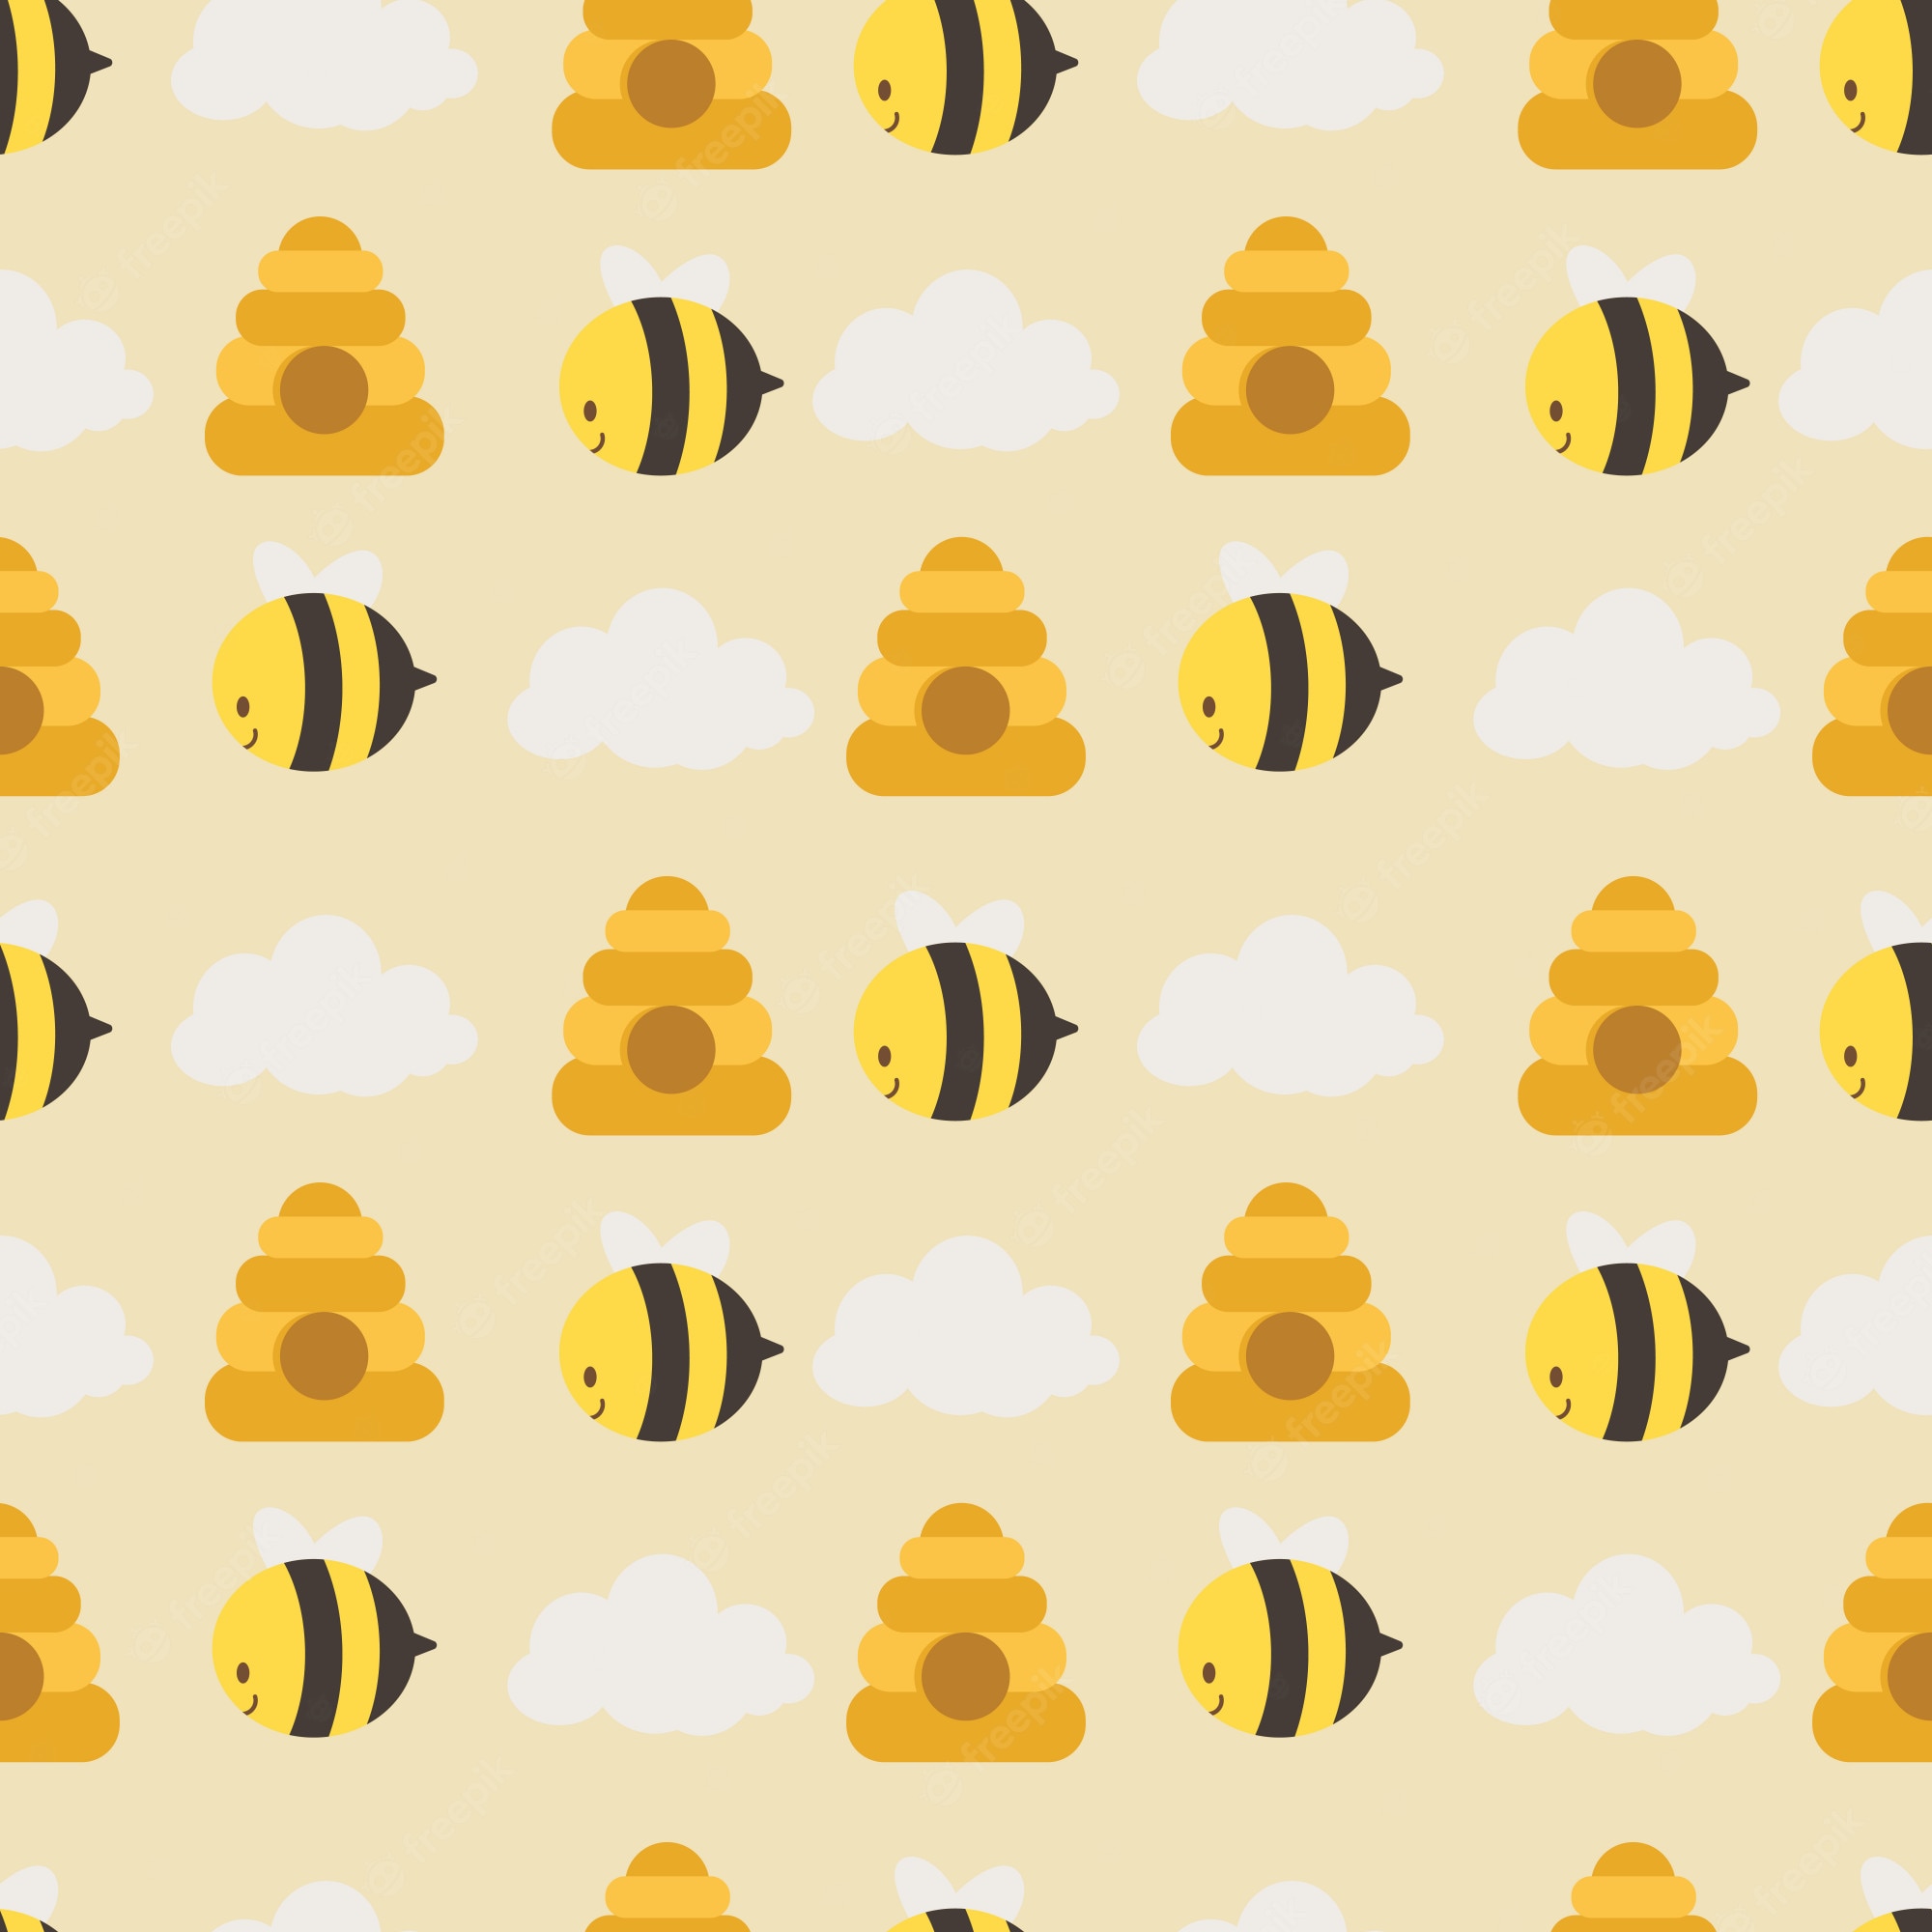 A pattern of bees and clouds on top - Bee